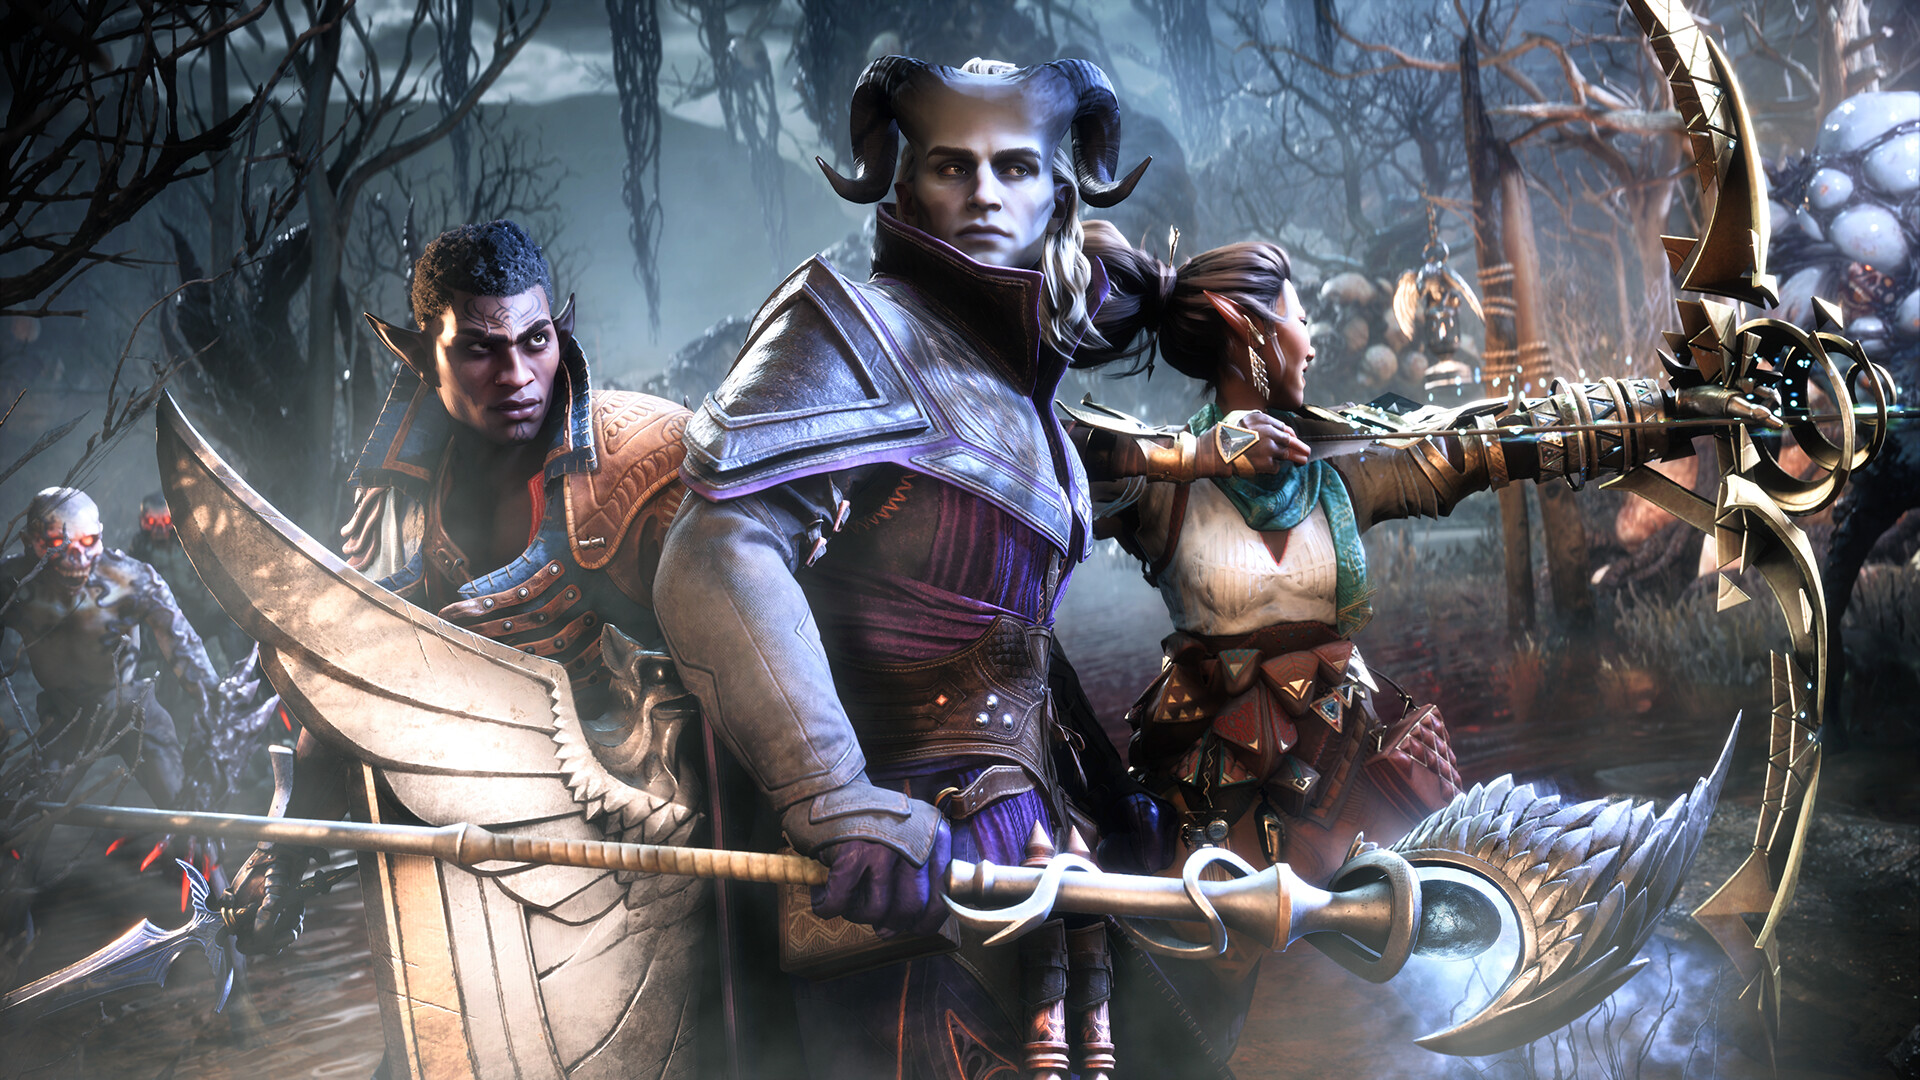 Dragon Age: The Veilguard Can Be Played on Steam Deck Natively